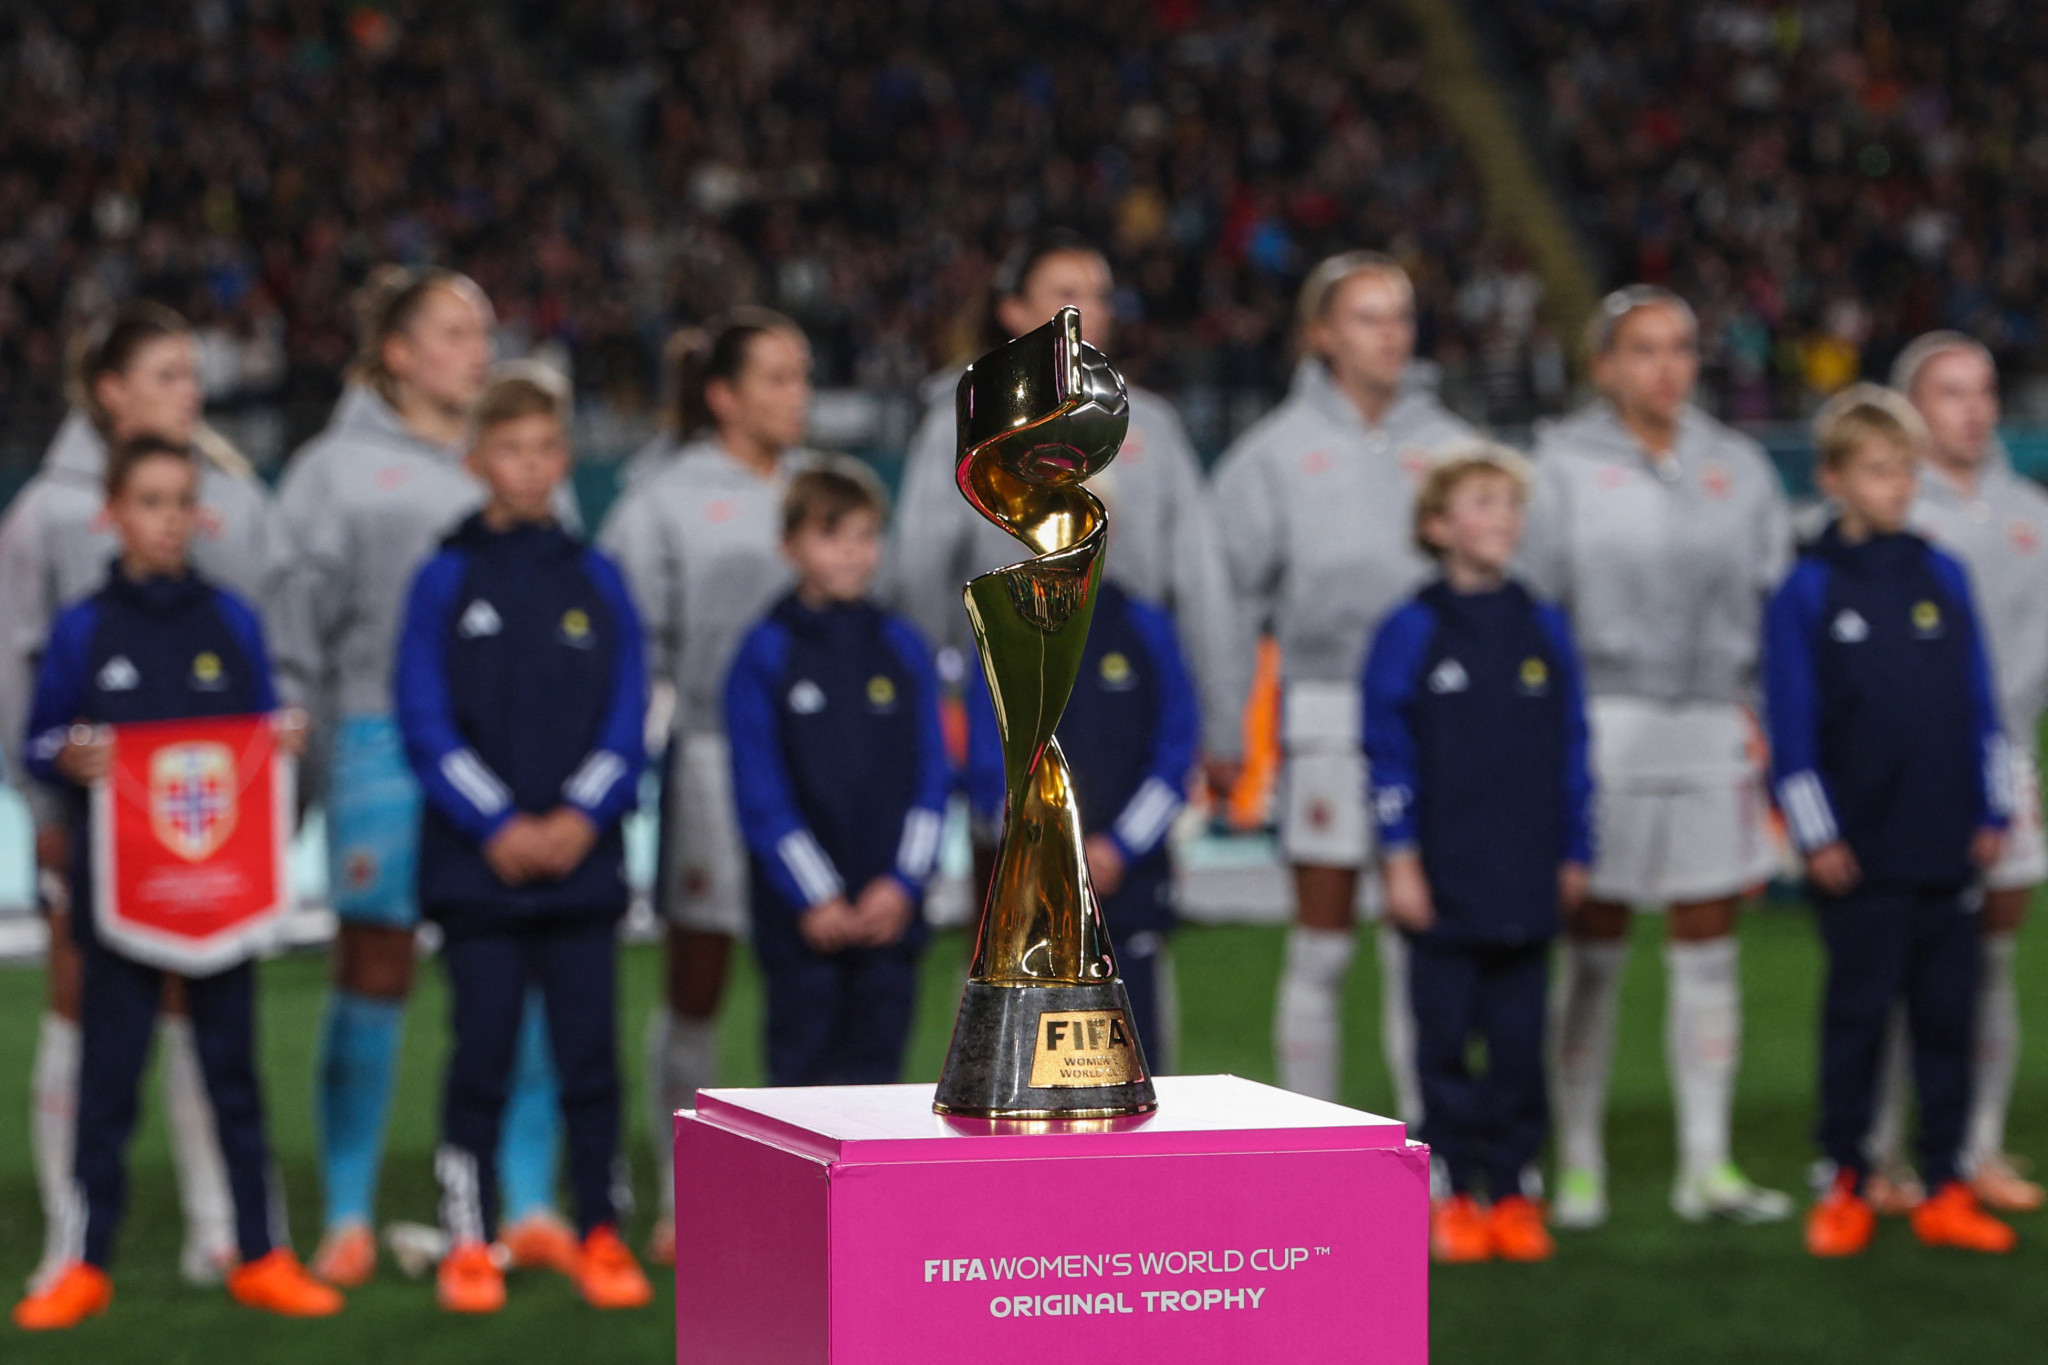 Thirty companies are part of FIFA's "sold out" partnership programme for the Women's World Cup ©Getty Images